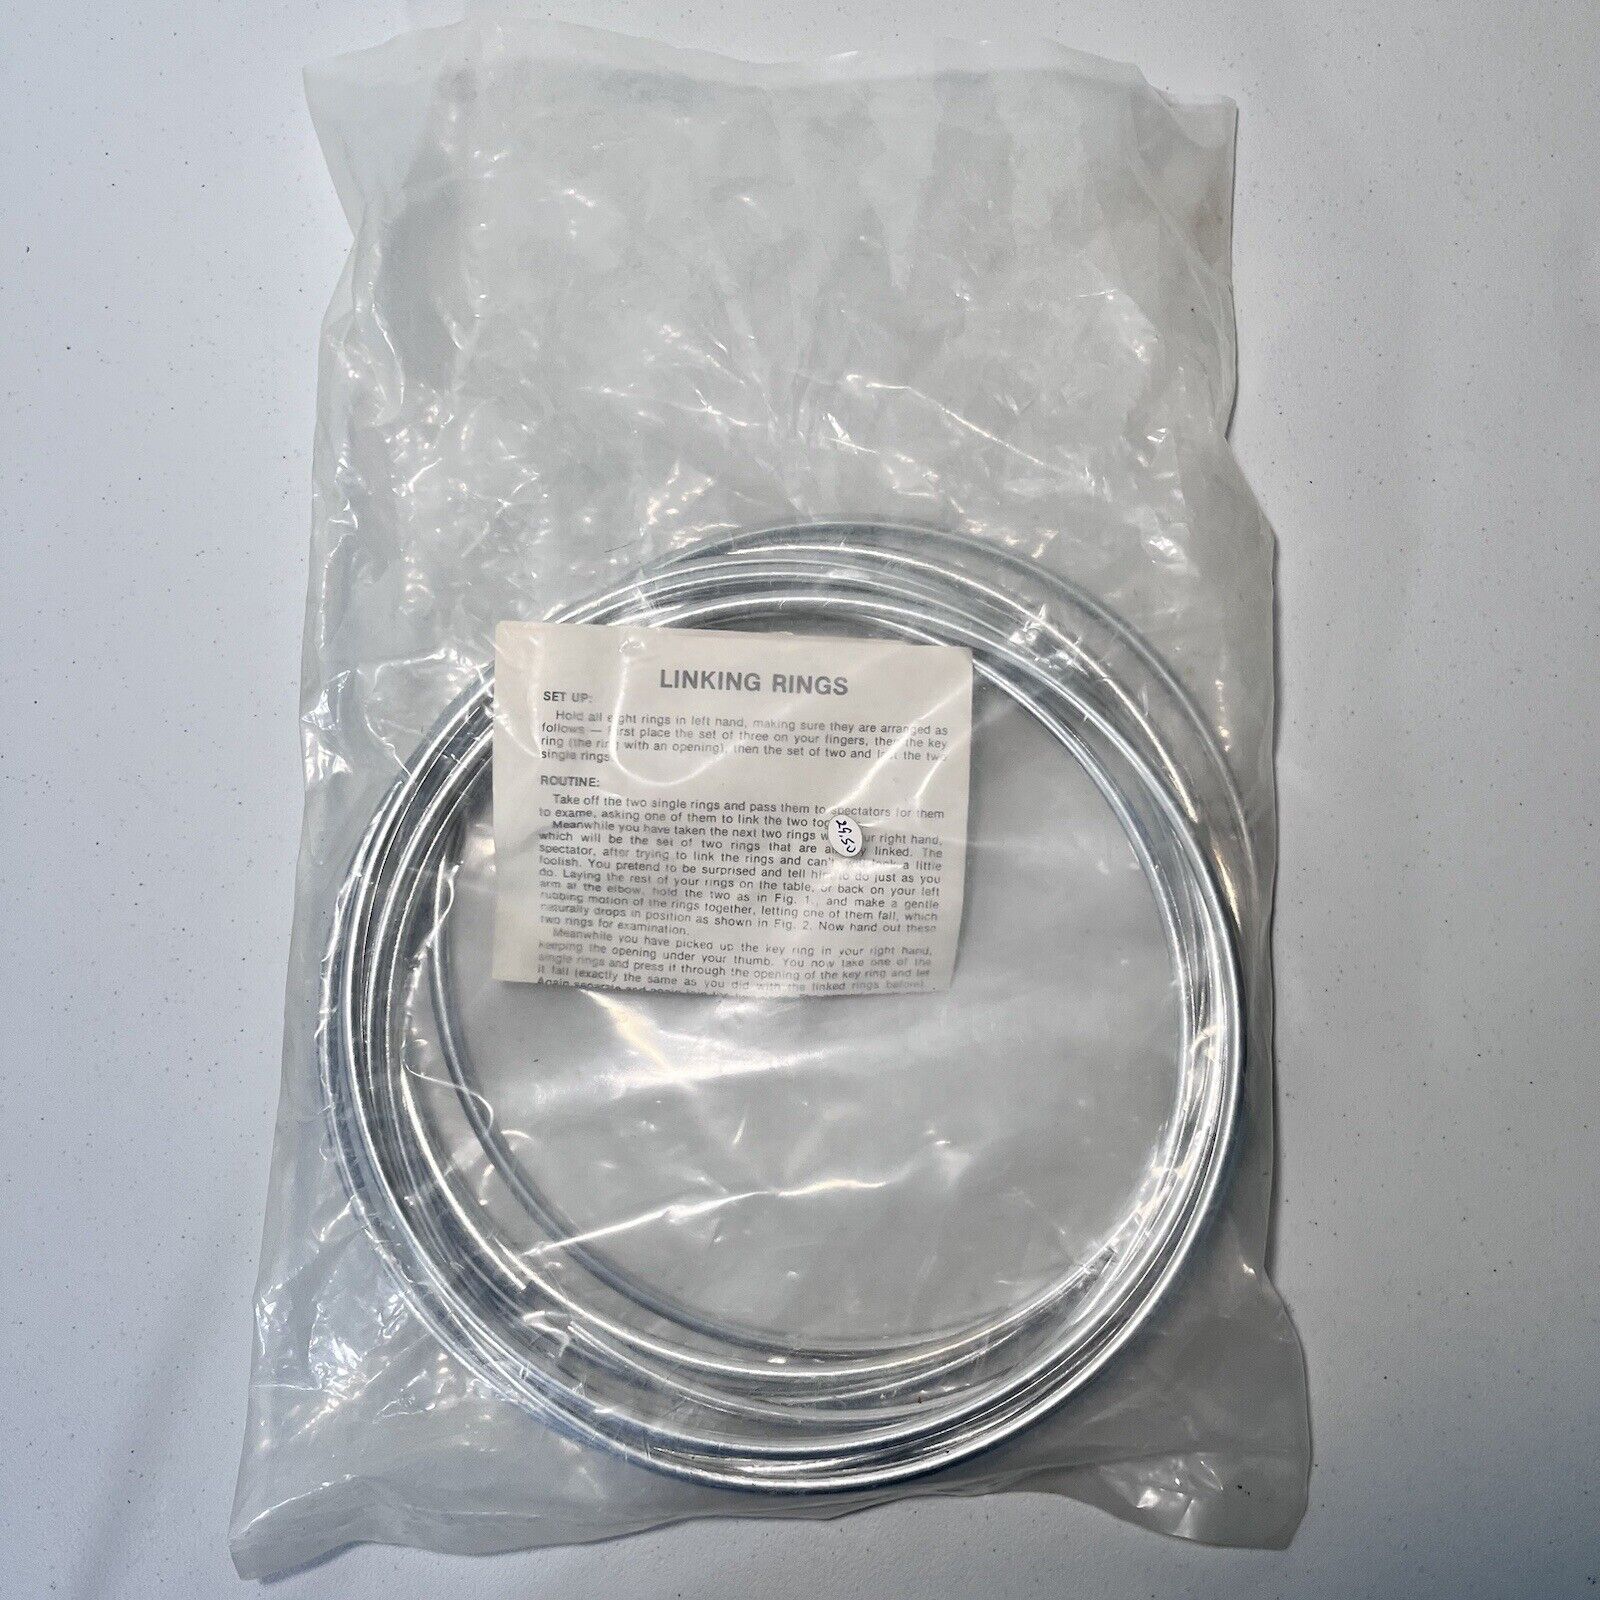 Magic Linking Rings 10 Inch, Heavy, In Original Package, Instructions Included